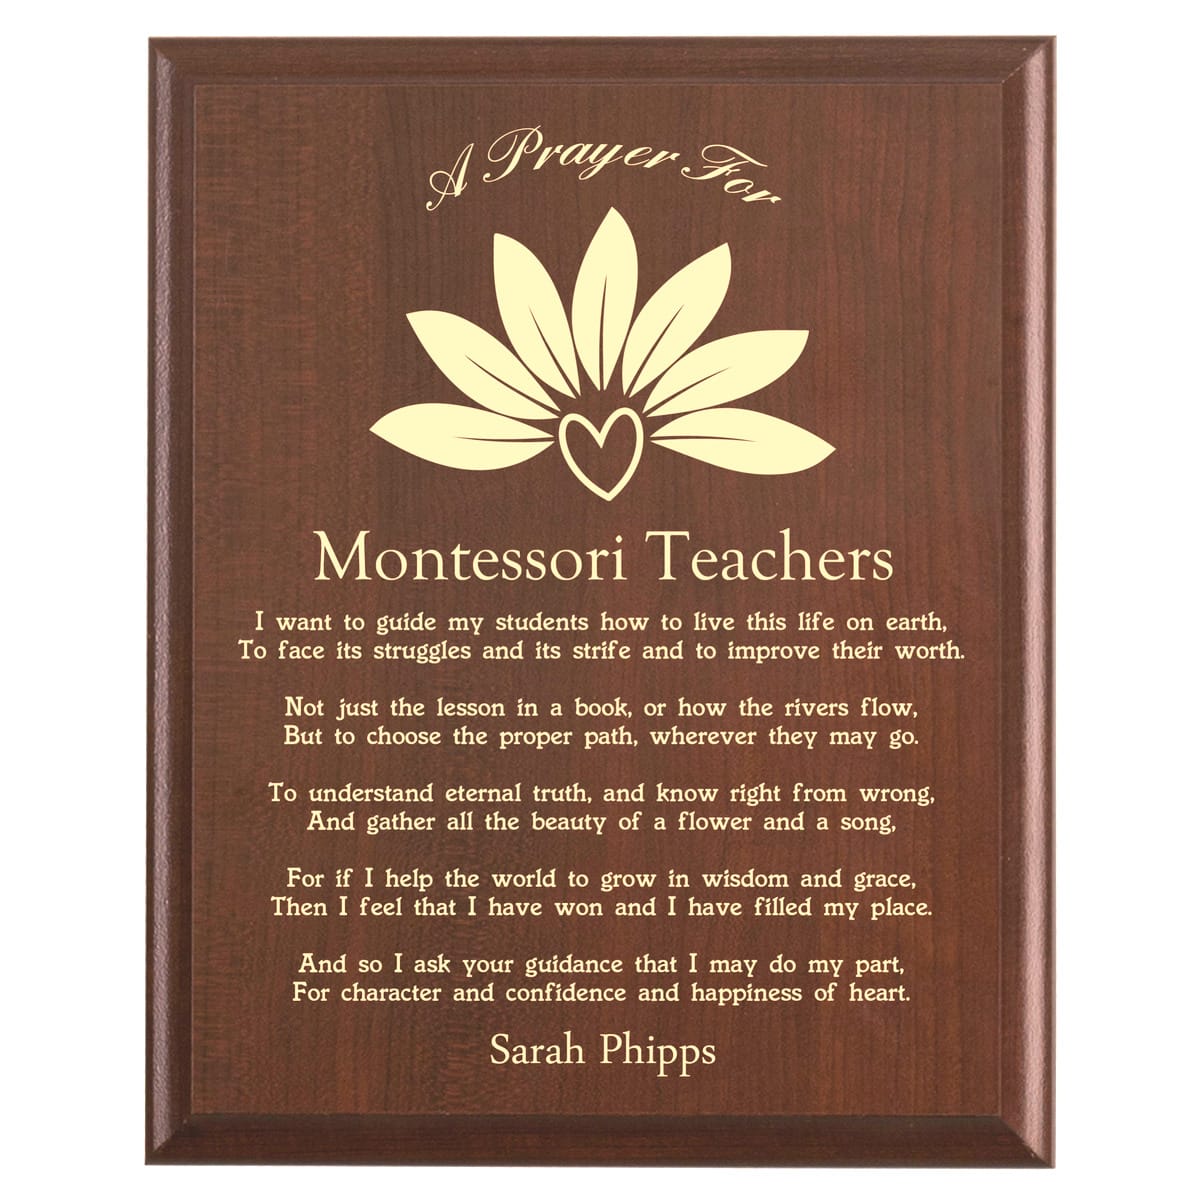 Plaque photo: Montessori Guide Prayer Plaque design with free personalization. Wood style finish with customized text.